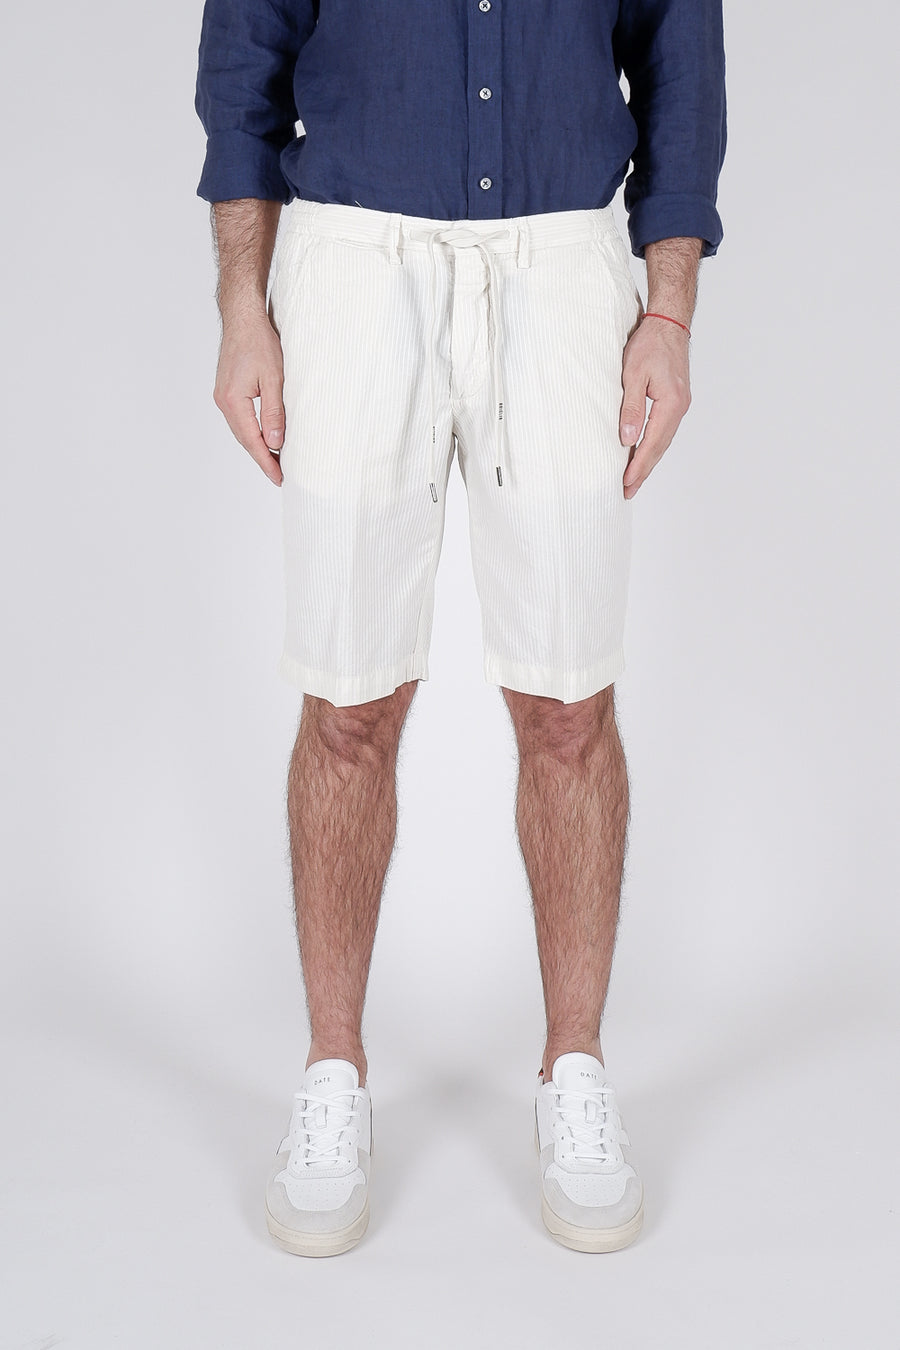 Buy the Briglia Italian Stripe Chino Shorts in White at Intro. Spend £100 for free UK delivery. Official stockists. We ship worldwide.